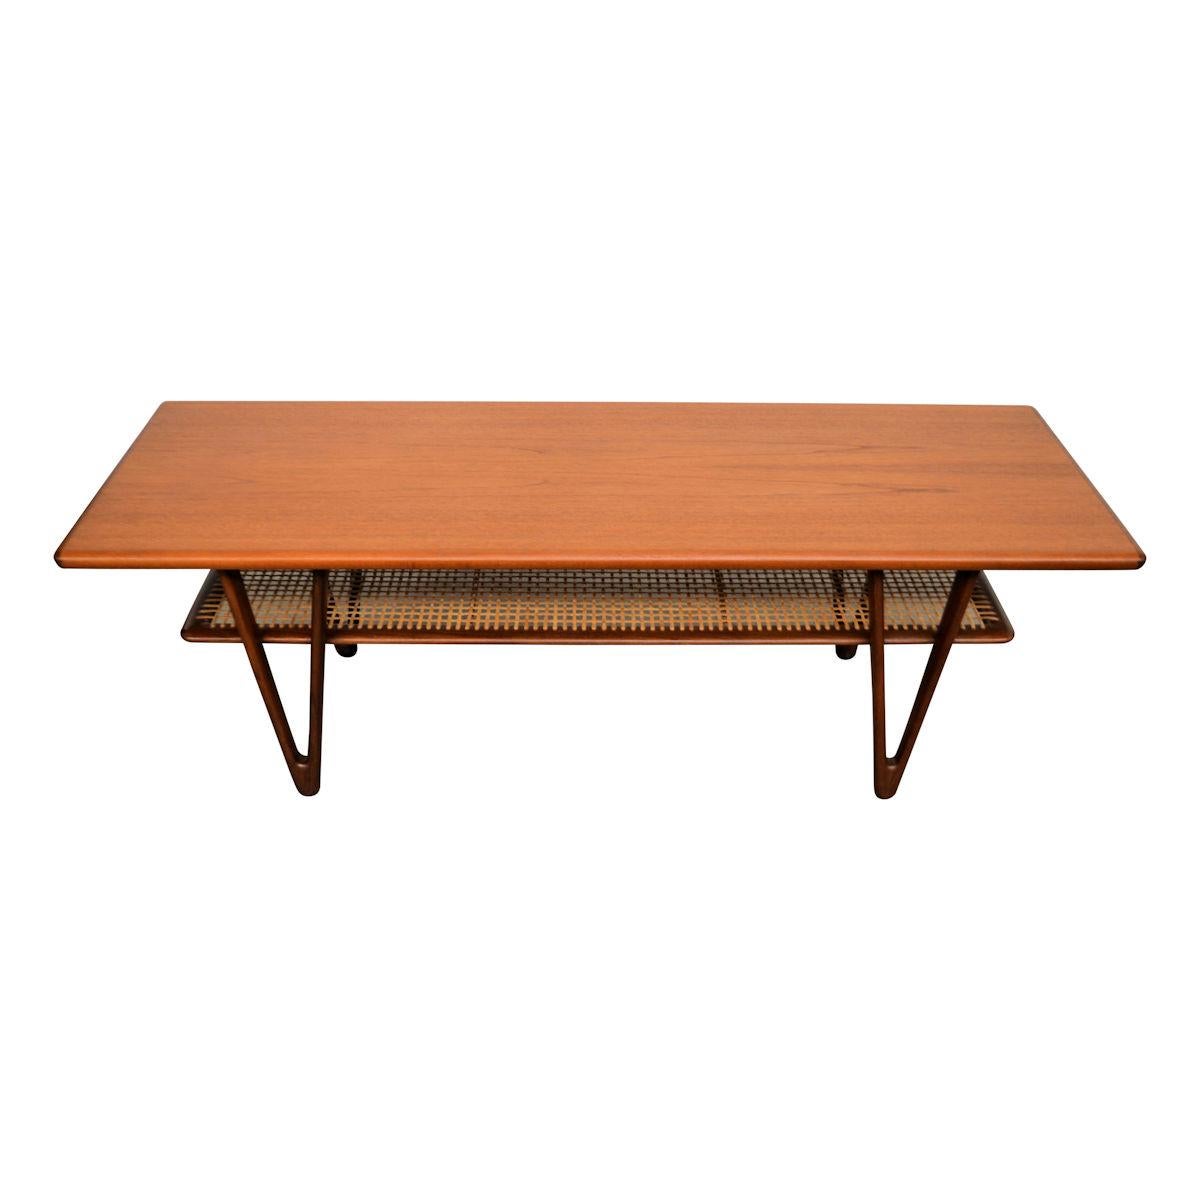 Gorgeous Danish design teak vintage coffee table in the style of Kurt Østervig. The table features beautiful rounded table top on corners. the stunning triangle legs and a ratan storage shelf for magazines and newspapers and such. A beautiful